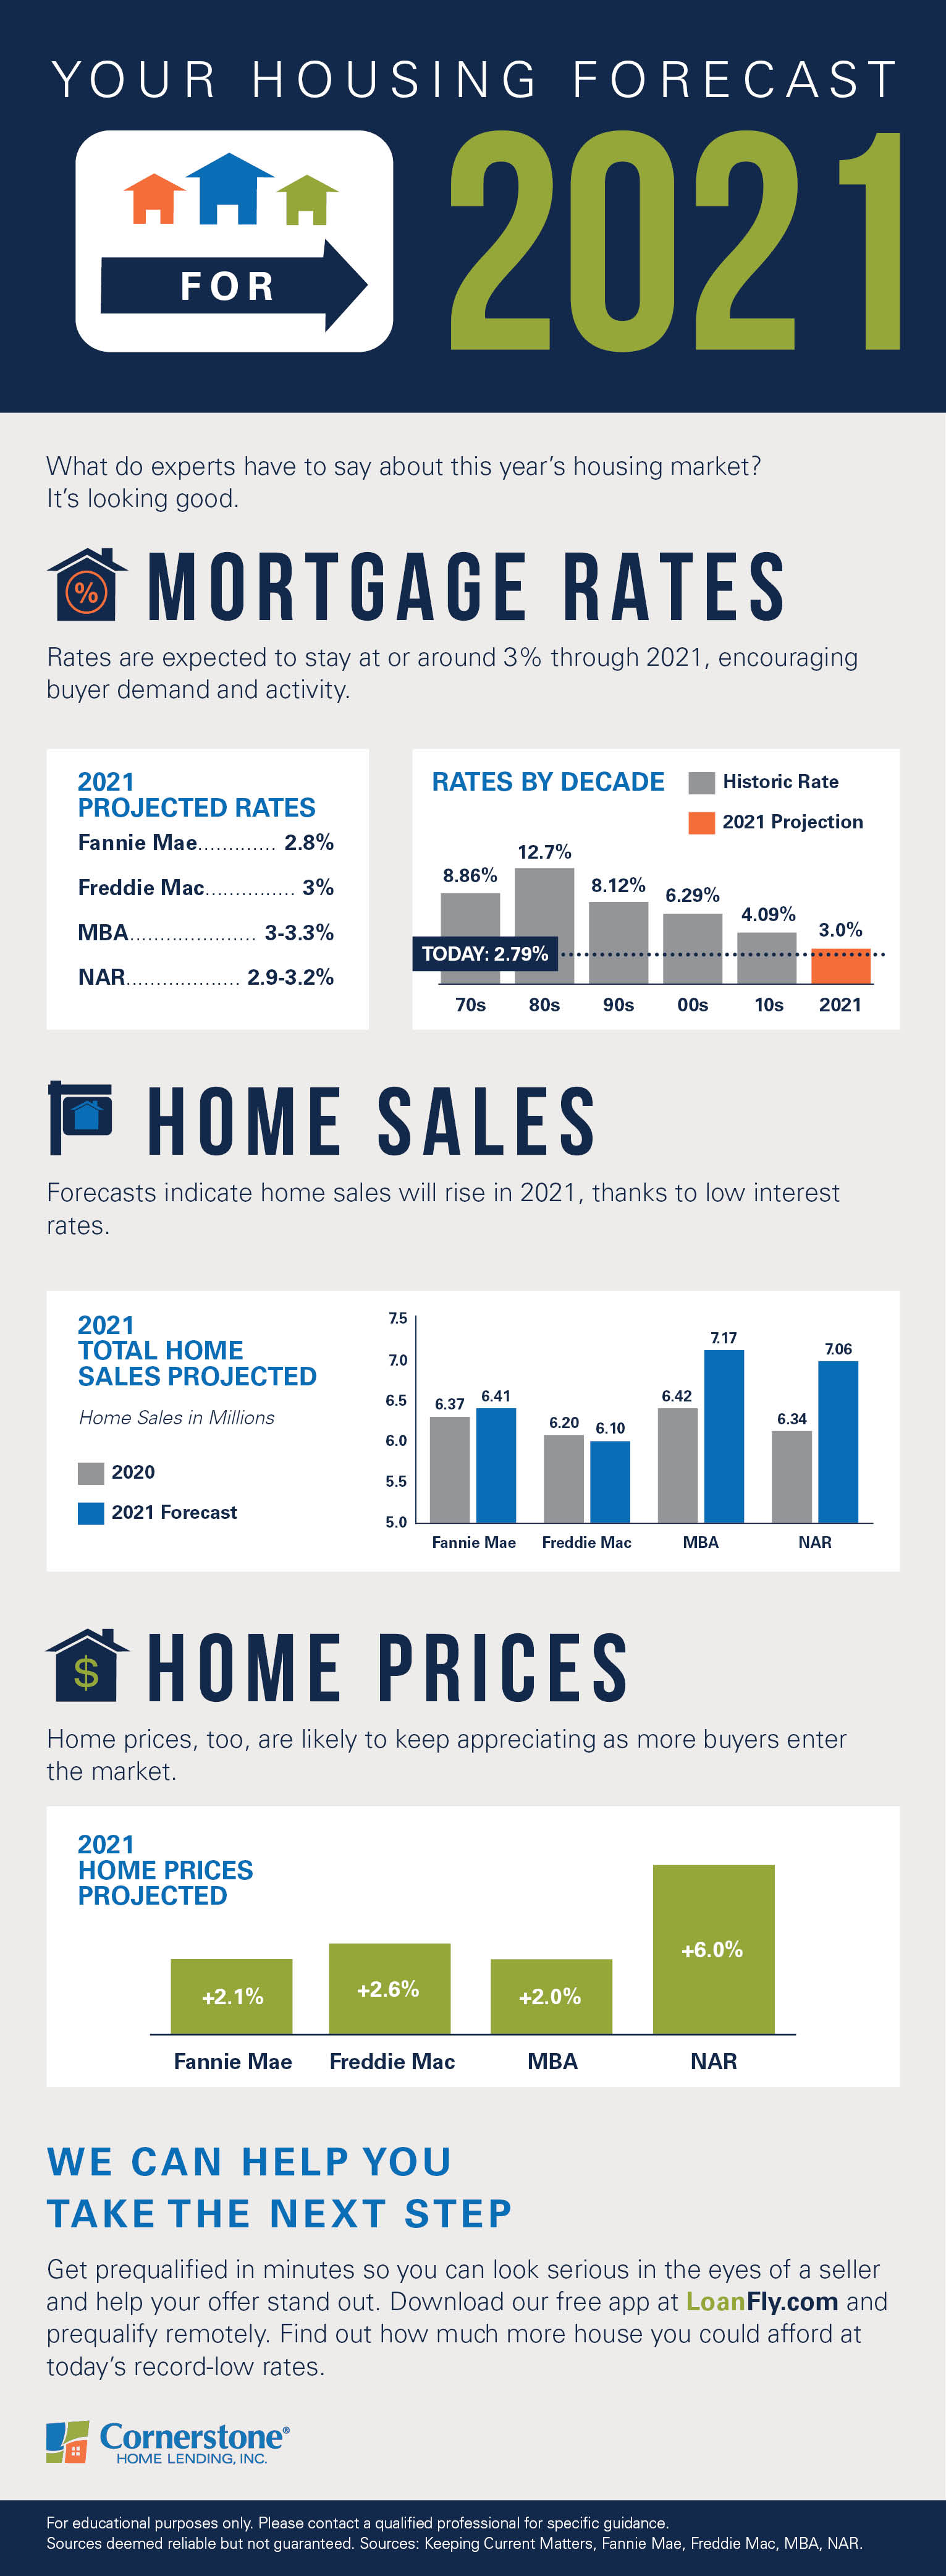 Housing and mortgage rates 2021 Here's your forecast.